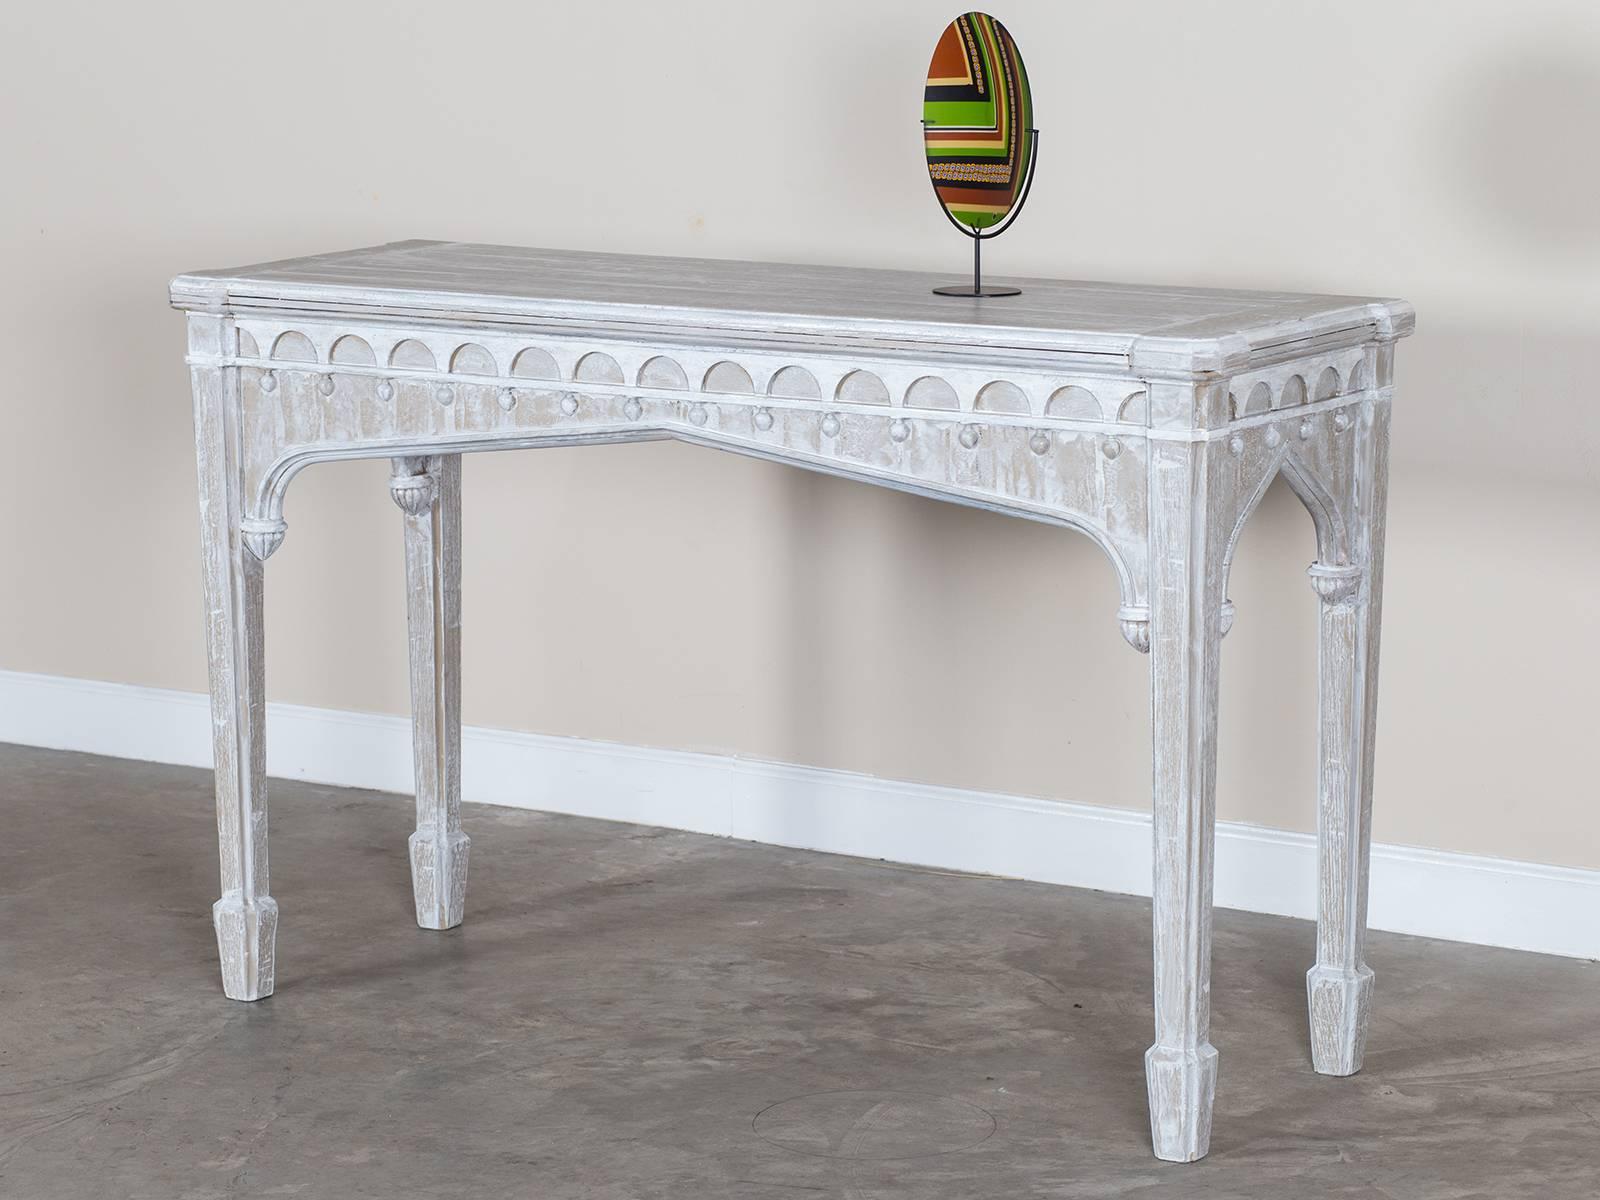 Mid-19th Century Antique English Painted Gothic Revival Oak Console Server Table, circa 1840